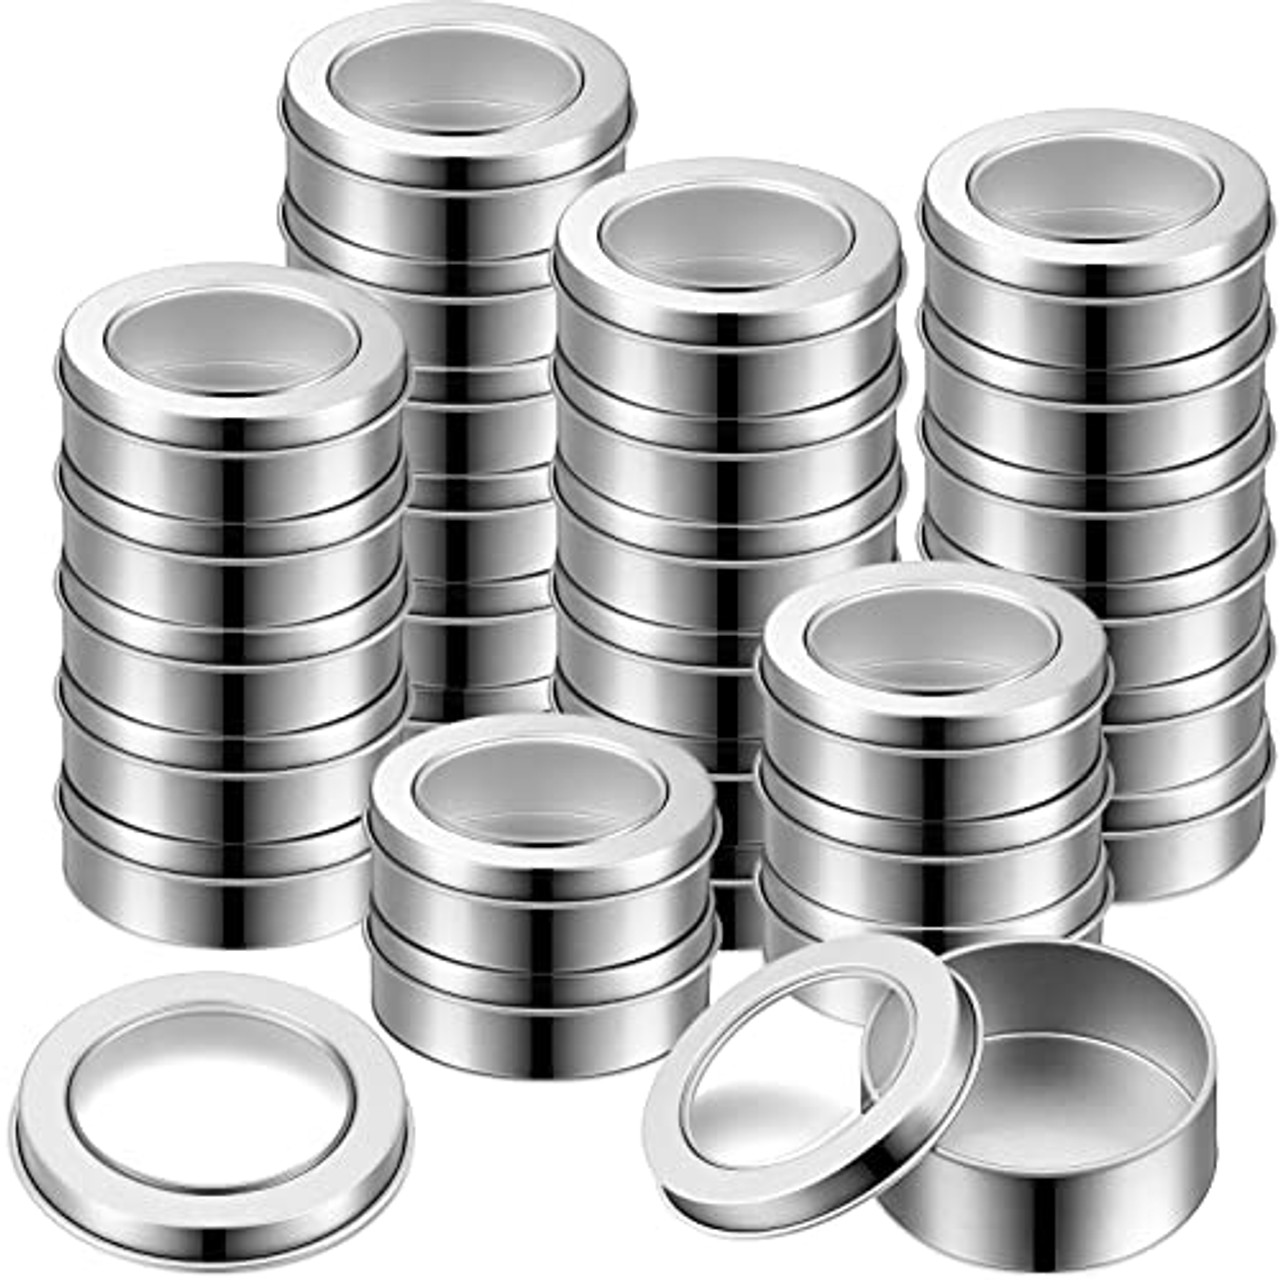 Lot of 24 Mimi Metal Tins - 10 Oz. Deep Round Screw Top Tin Containers -  Silver